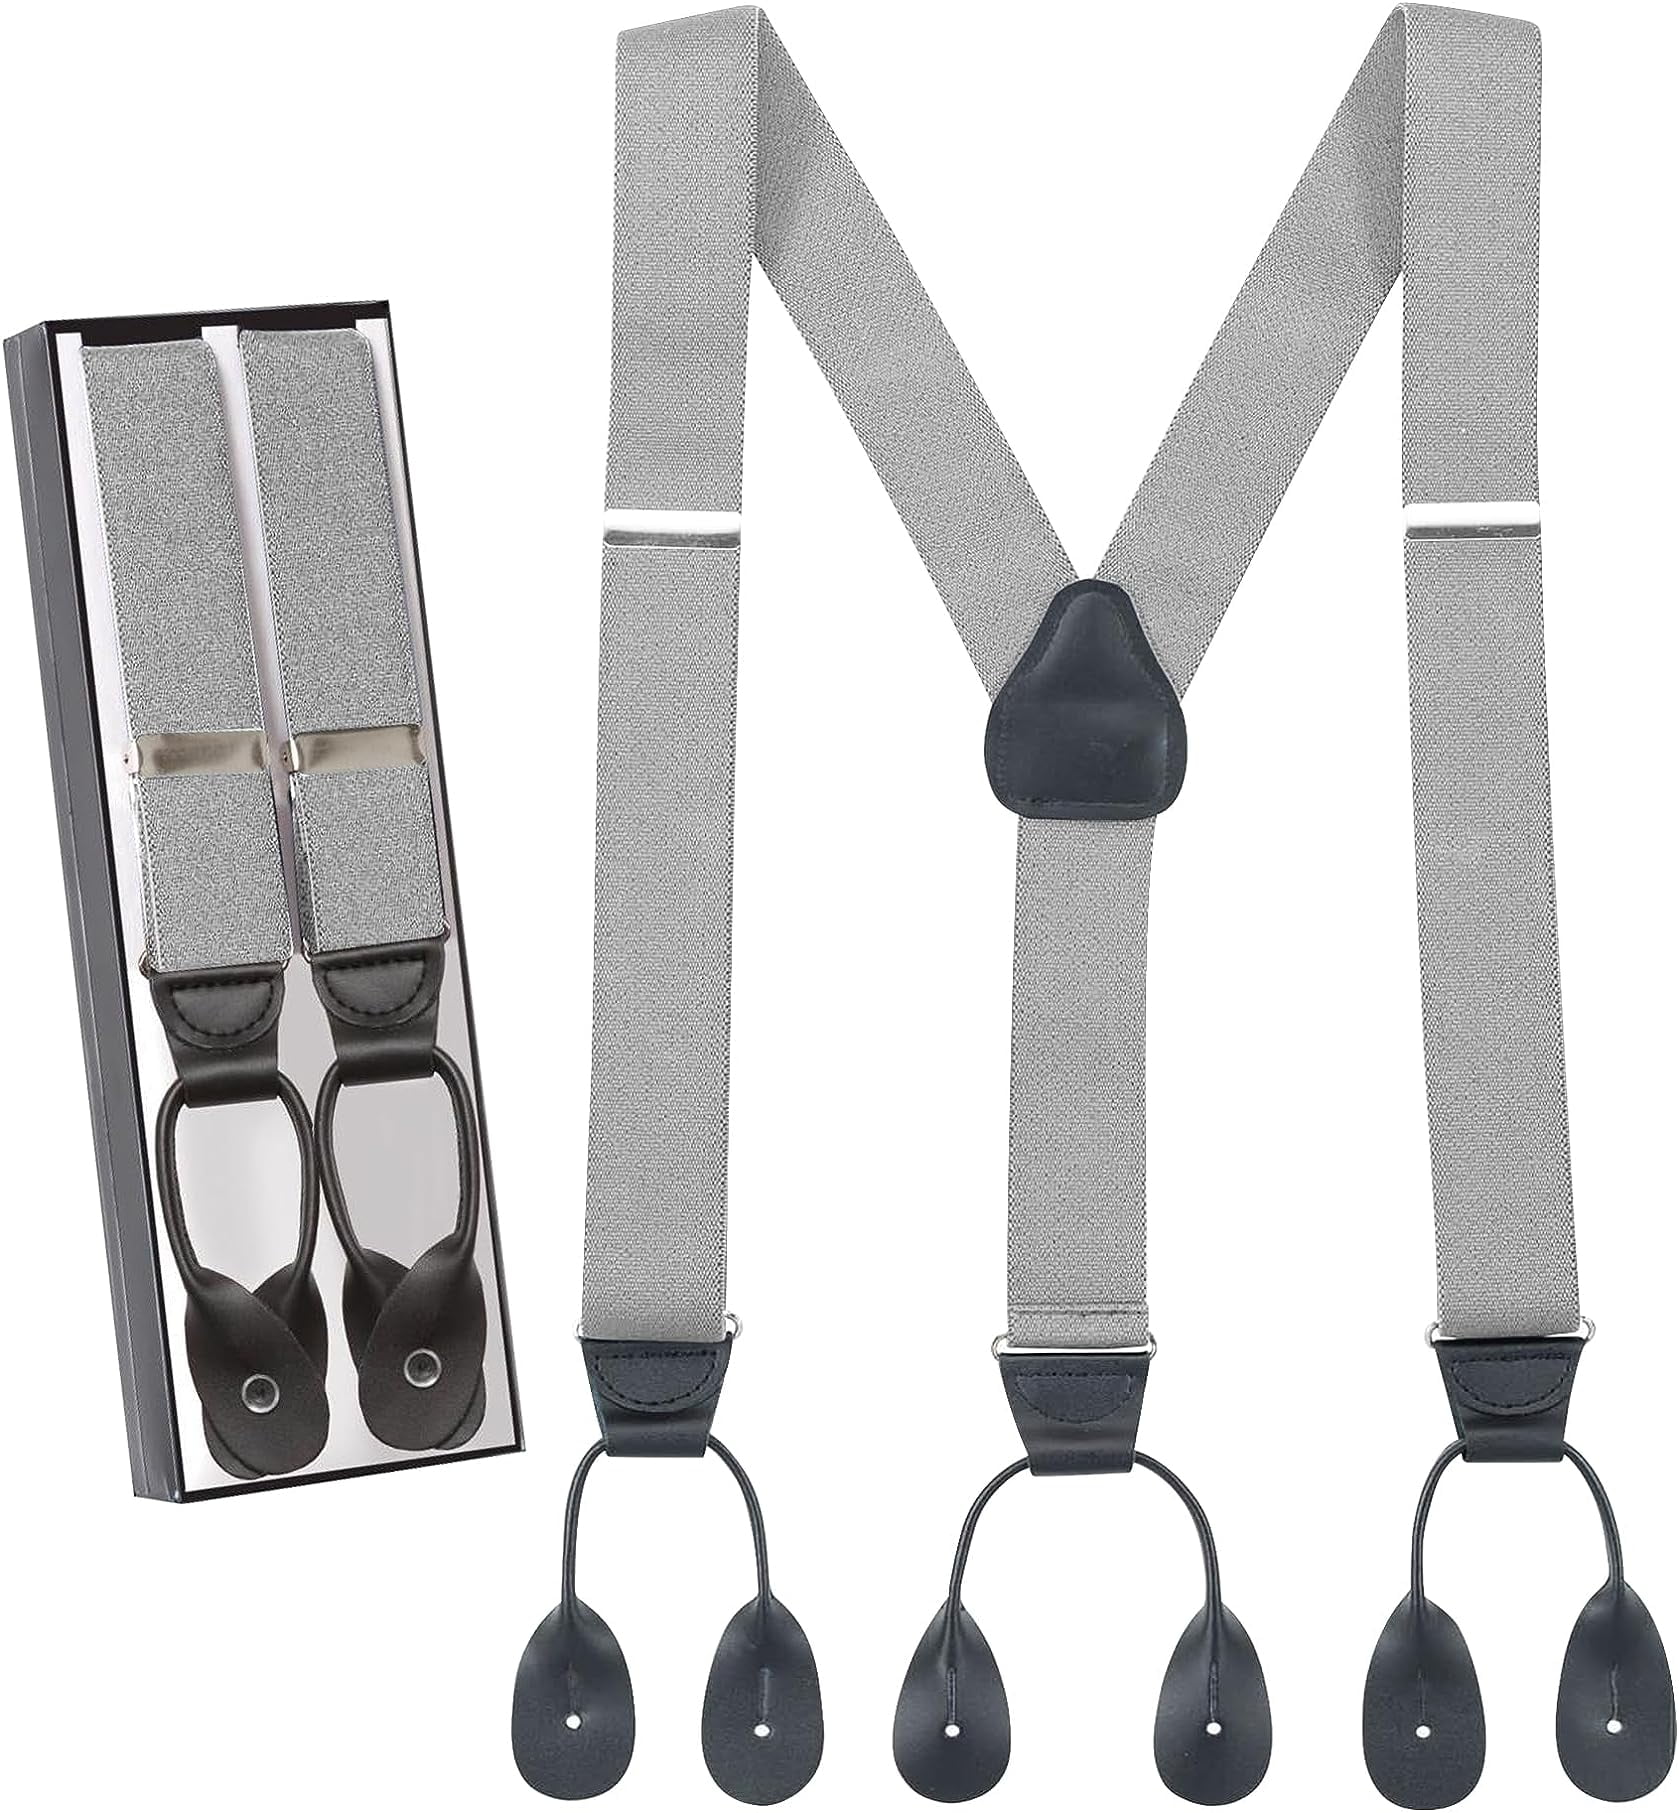 Hold'Em Men Y-Back Genuine Leather Trimmed Button End Tuxedo Suspenders  Many Colors and Designs - Black (Tall 54 Long) 